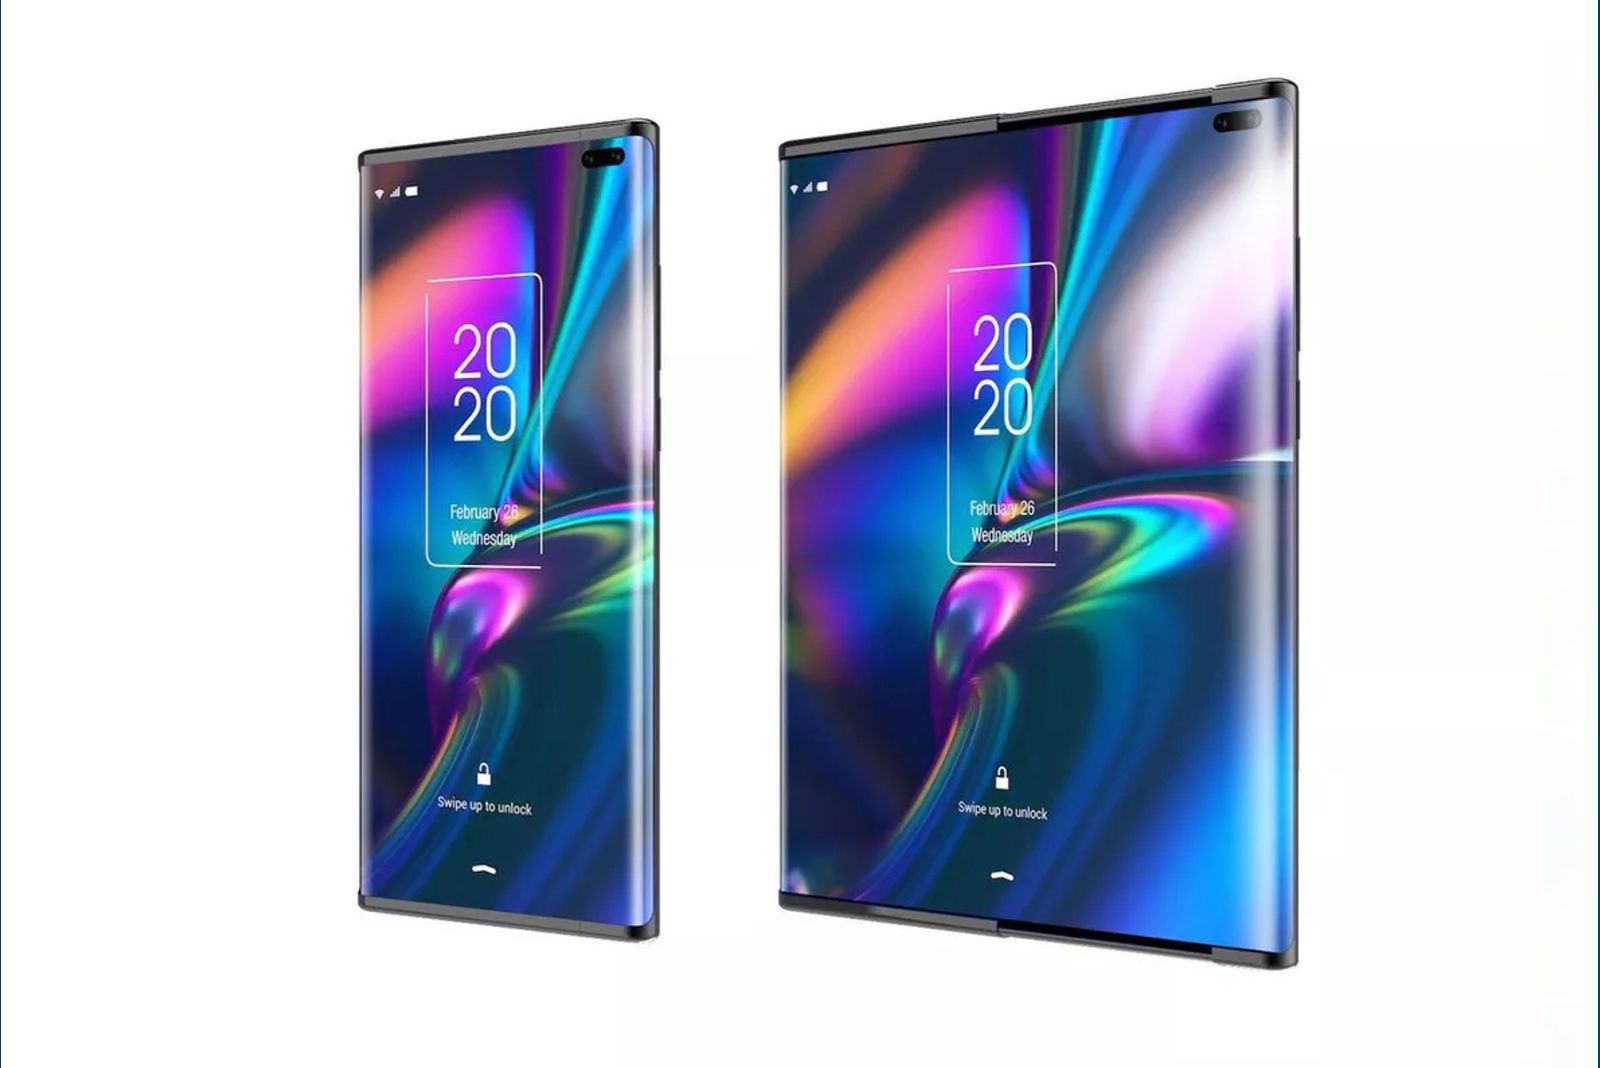 Leaked images of TCL phone show extendable slide-out display image 1